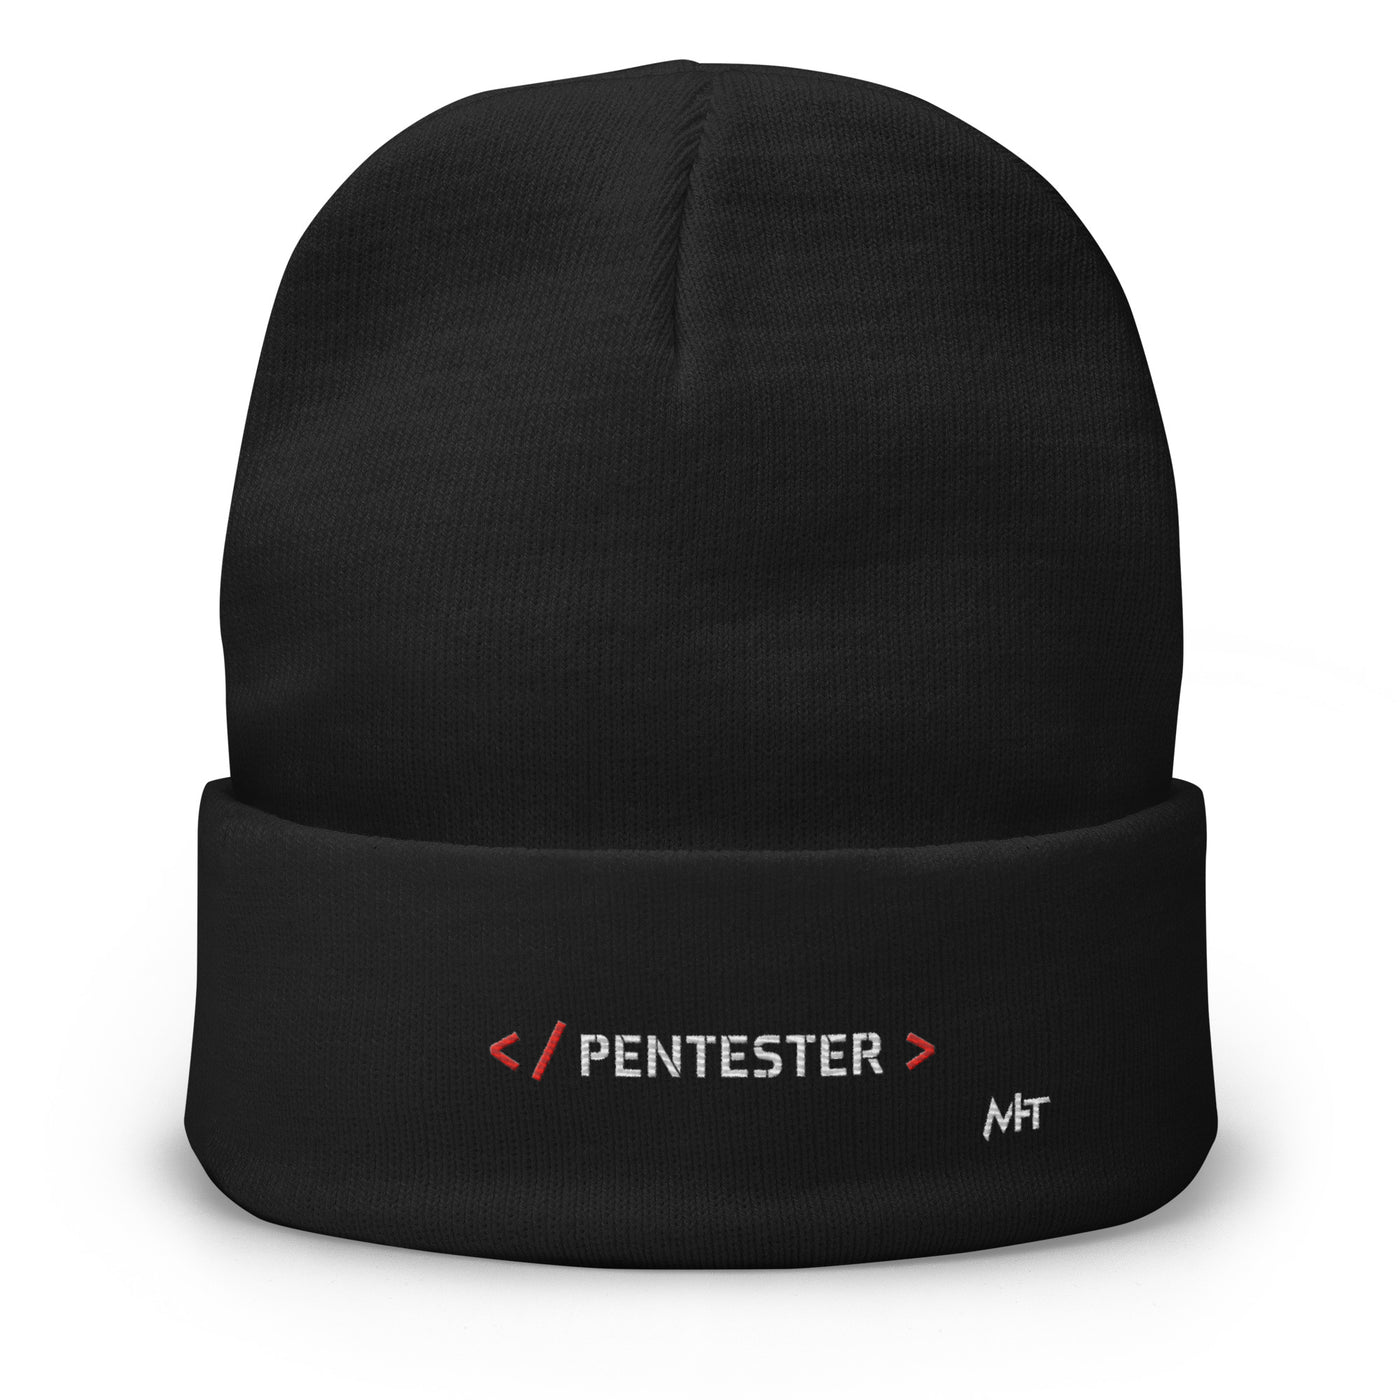 Pentester - Embroidered Beanie